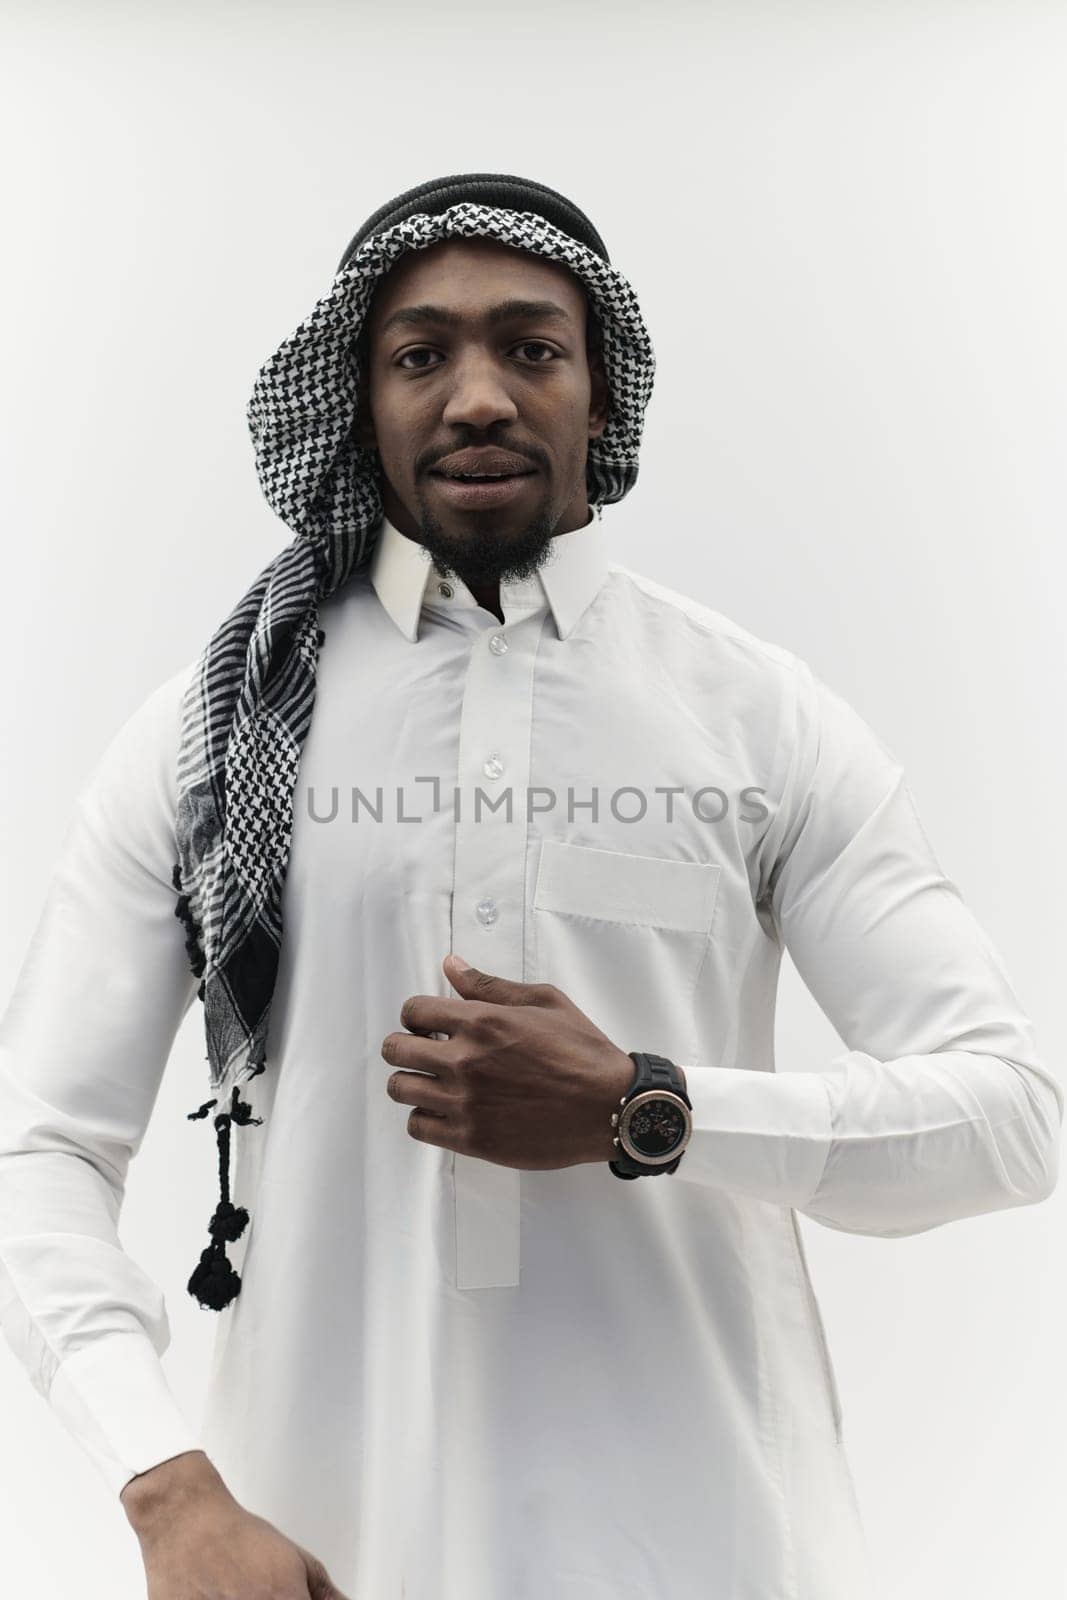 Arabic entrepreneur captures a self-portrait against an isolated white background, radiating ambition, determination, and corporate charisma, embodying the essence of a successful and influential business leader.